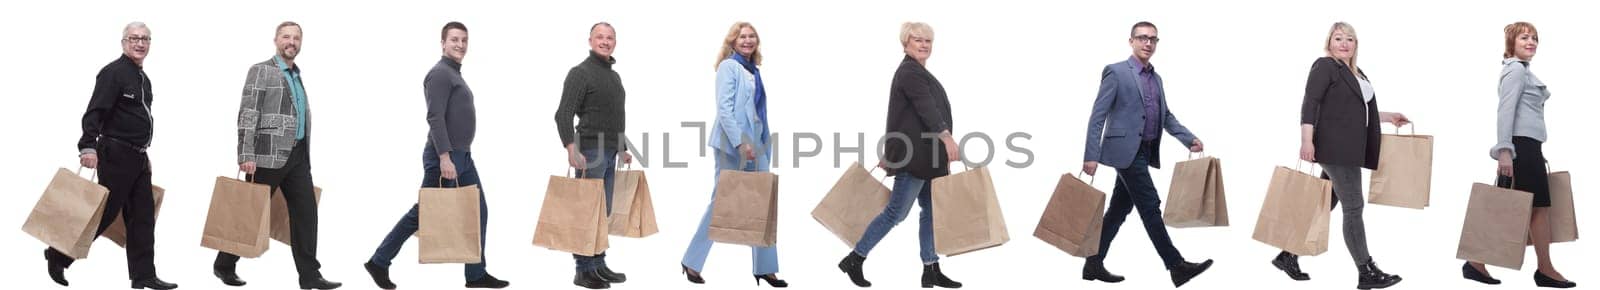 a line of people with shopping bags. side view by asdf